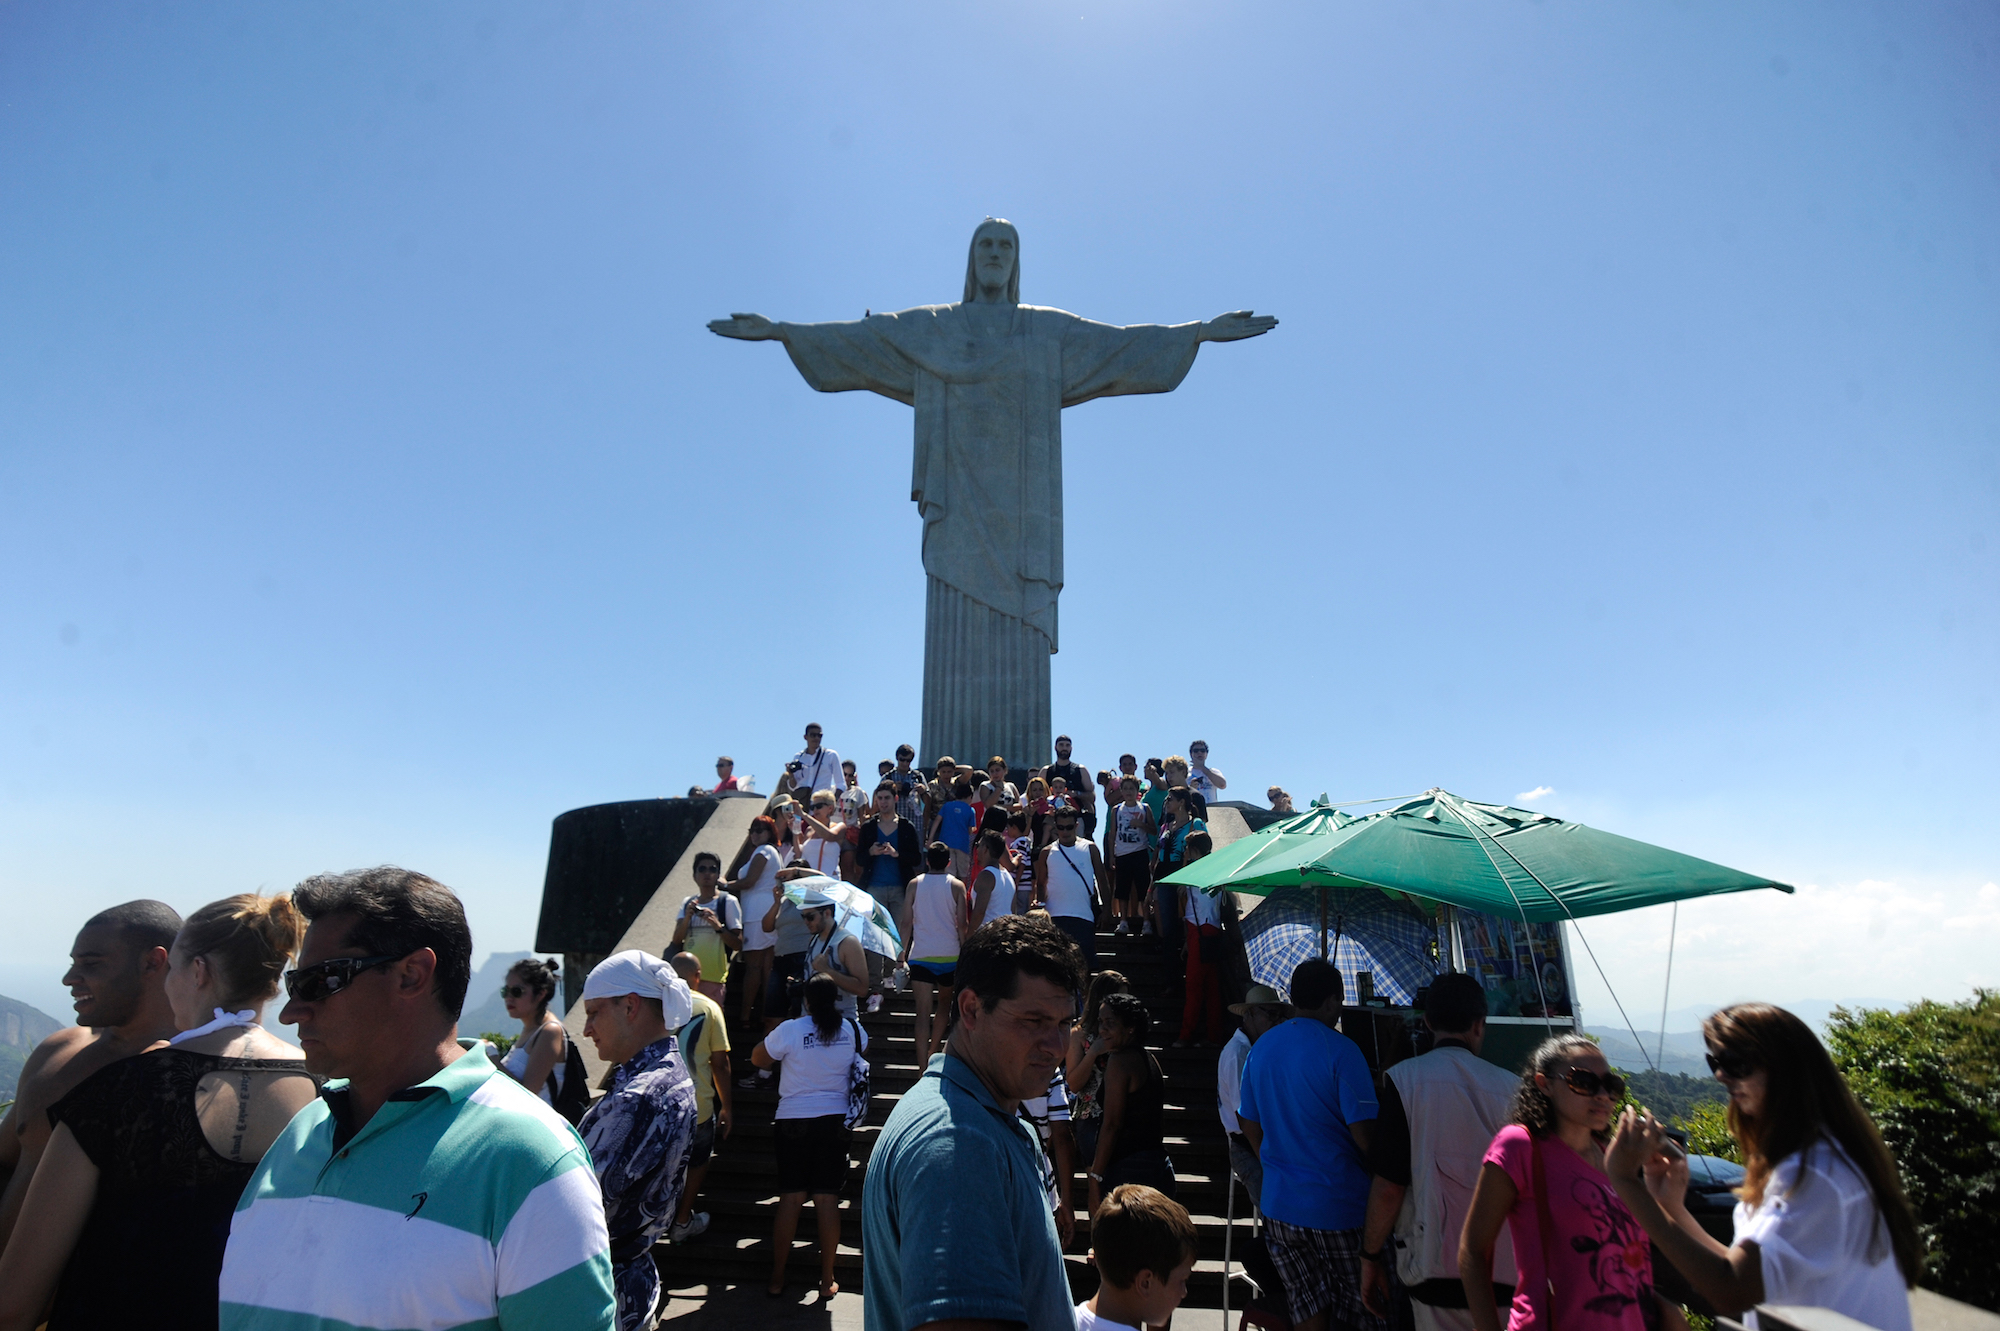 Brazil's international tourism records remarkable growth